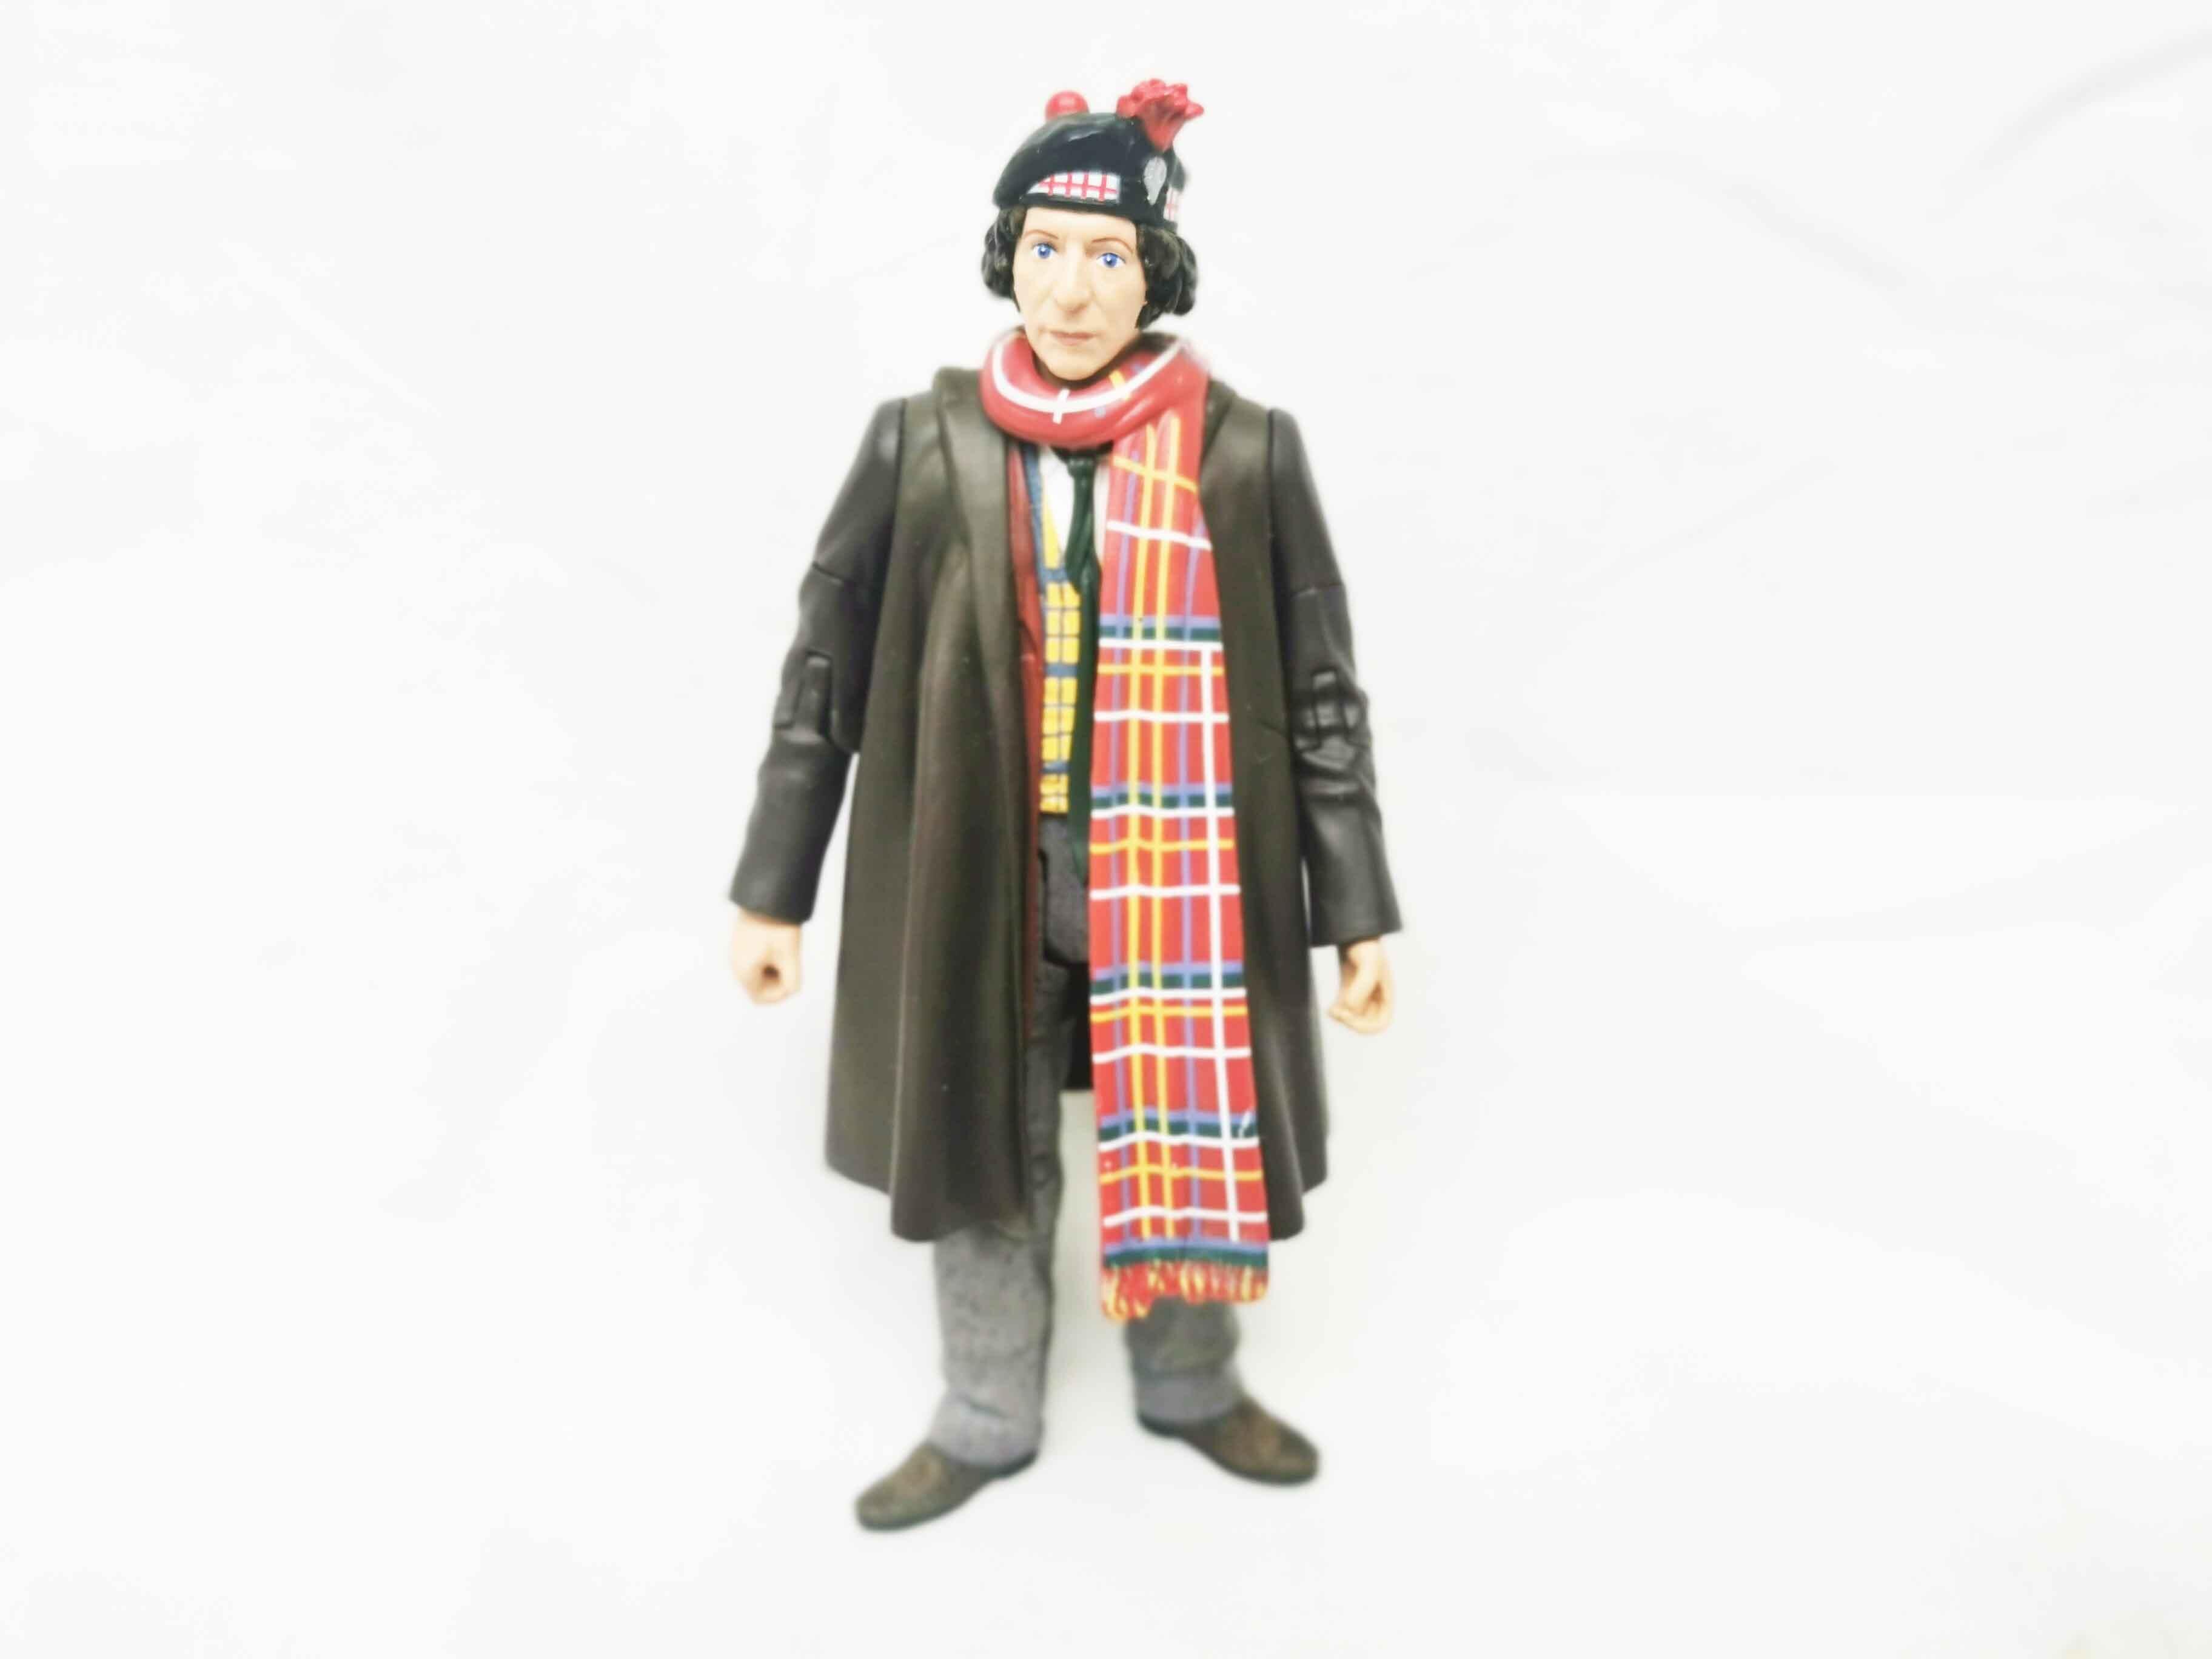 Doctor Who 4th Tom Baker Terror of the Zygons Action Figure 5